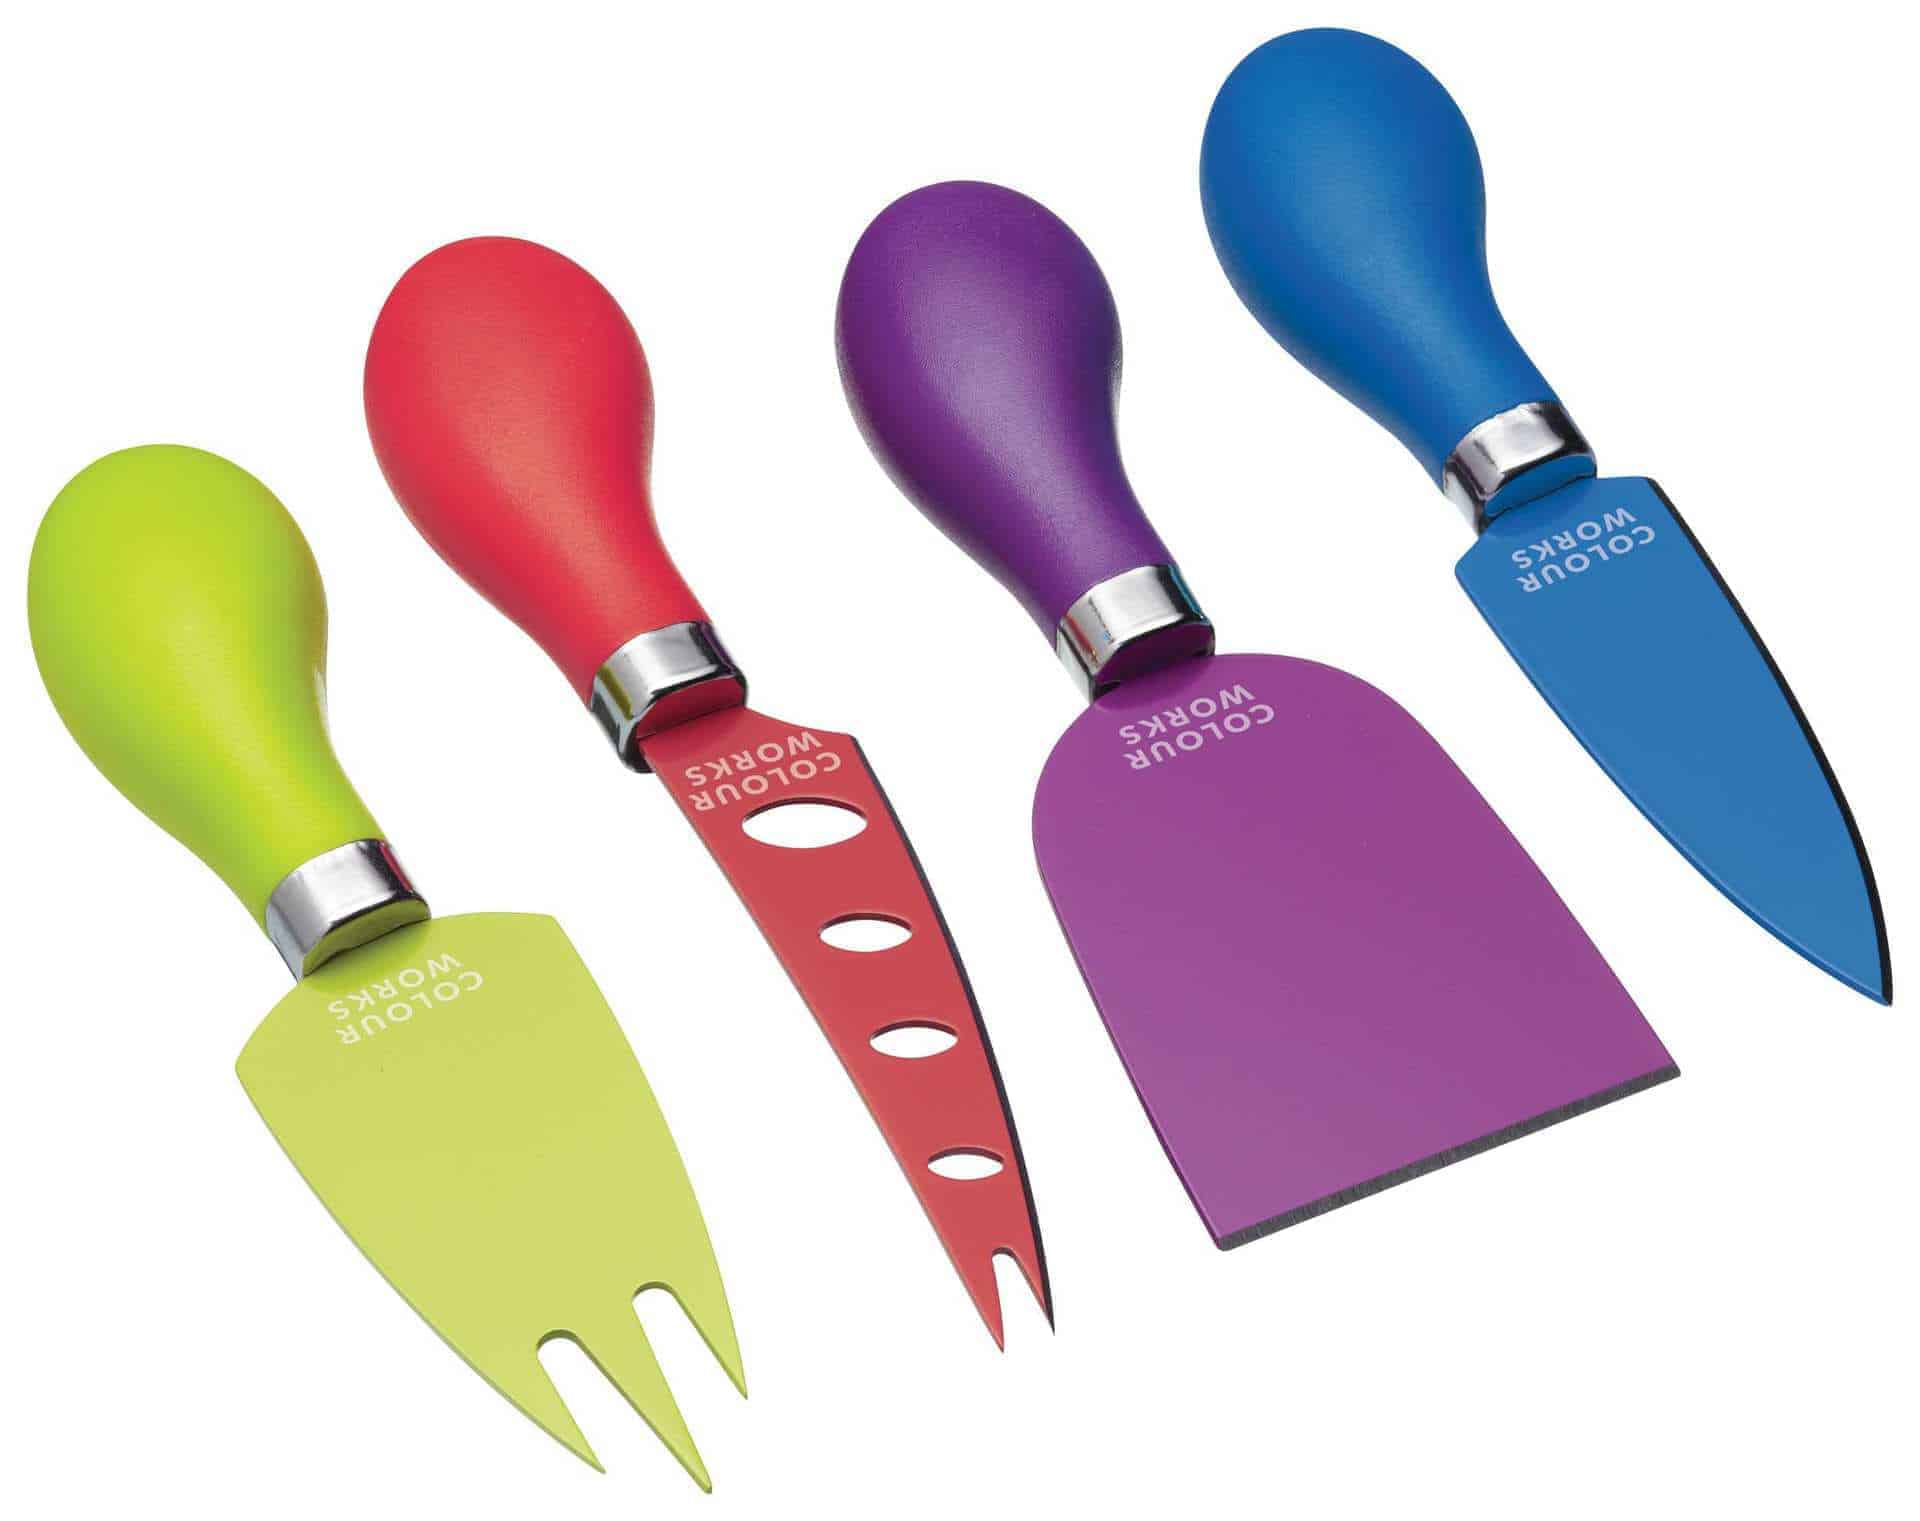 Cheese Server Set Colourful Colourworks